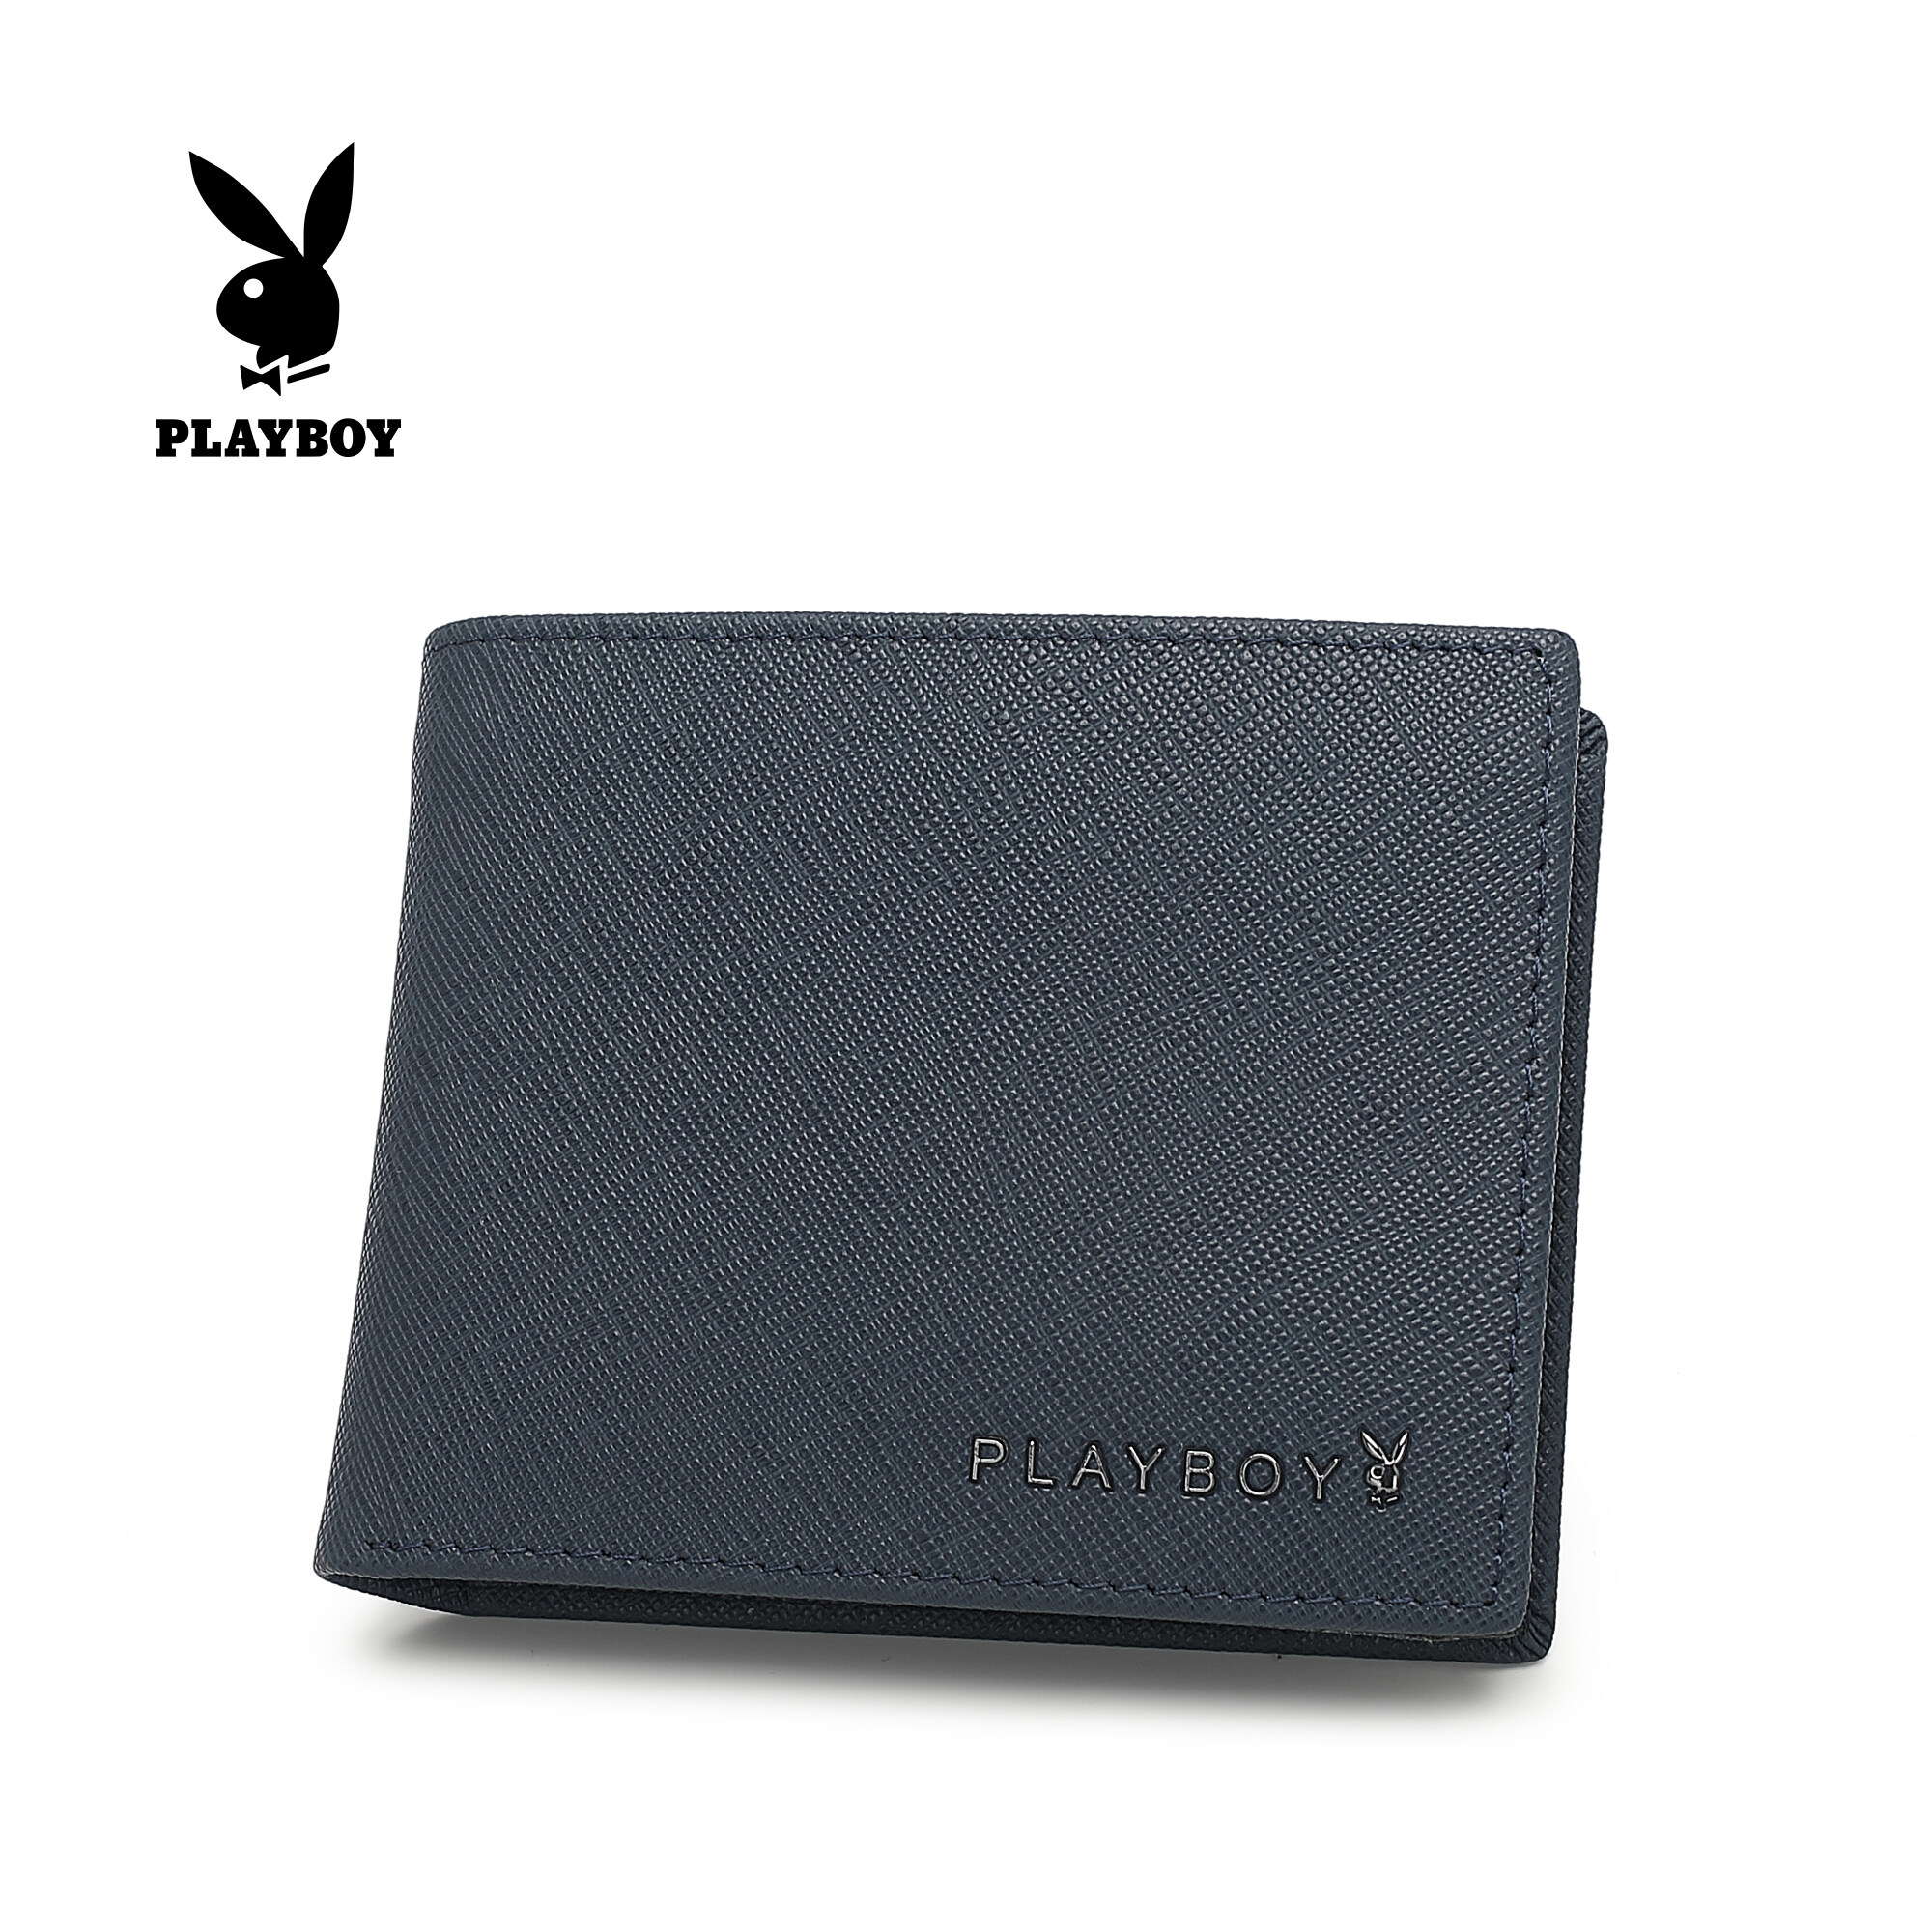 PLAYBOY Genuine Leather RFID Bifold Wallet PW 276/PW 277 Multi Color